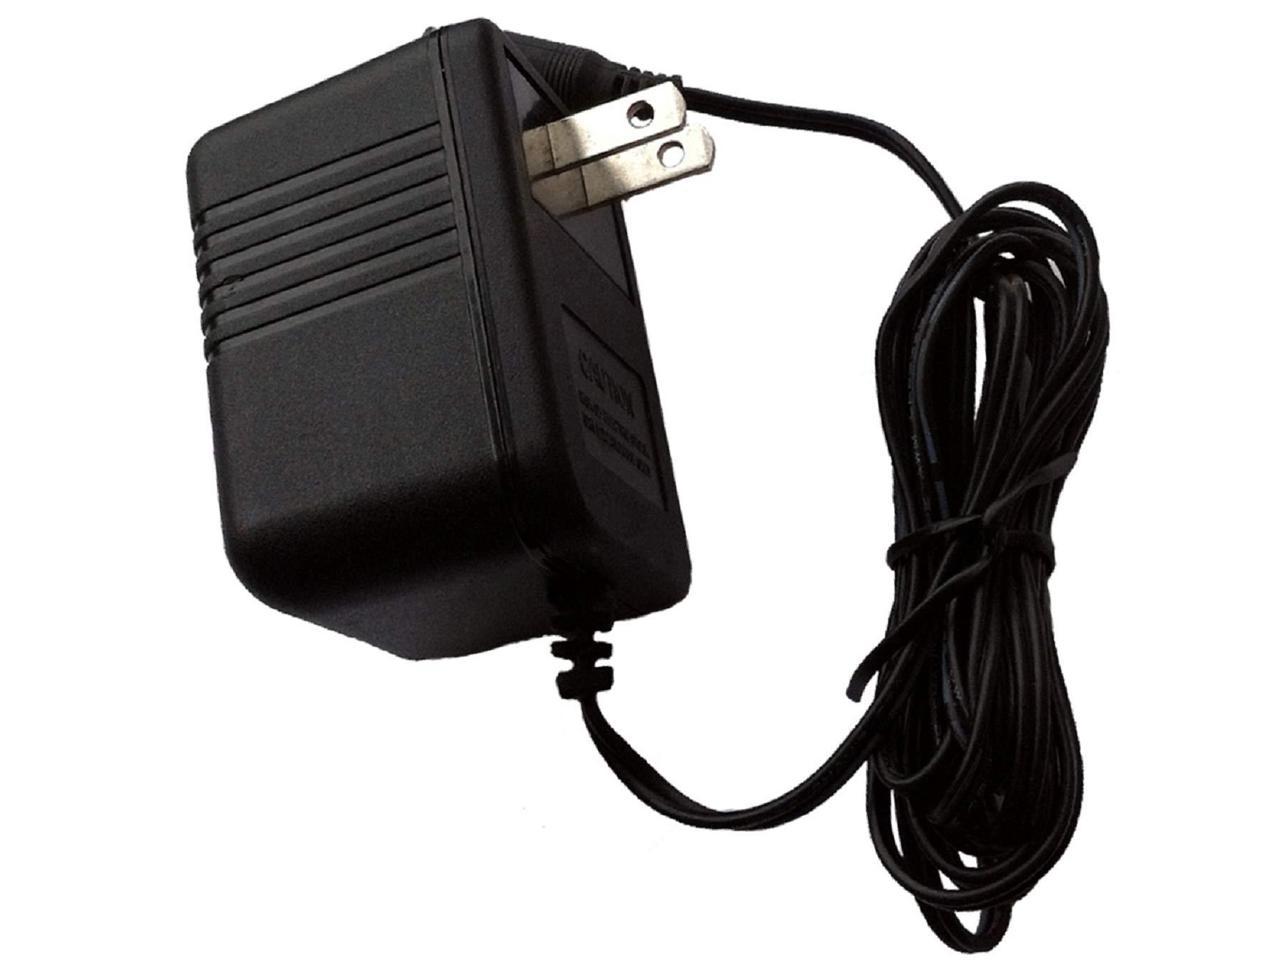 JT-240V0650A JT240V0650A 24V AC 24VAC Changzhou Jutai Electronic Co Ltd SLLEA AC to AC Adapter for CZJUTAI Model No. Power Supply Cord Cable PS Charger Mains PSU